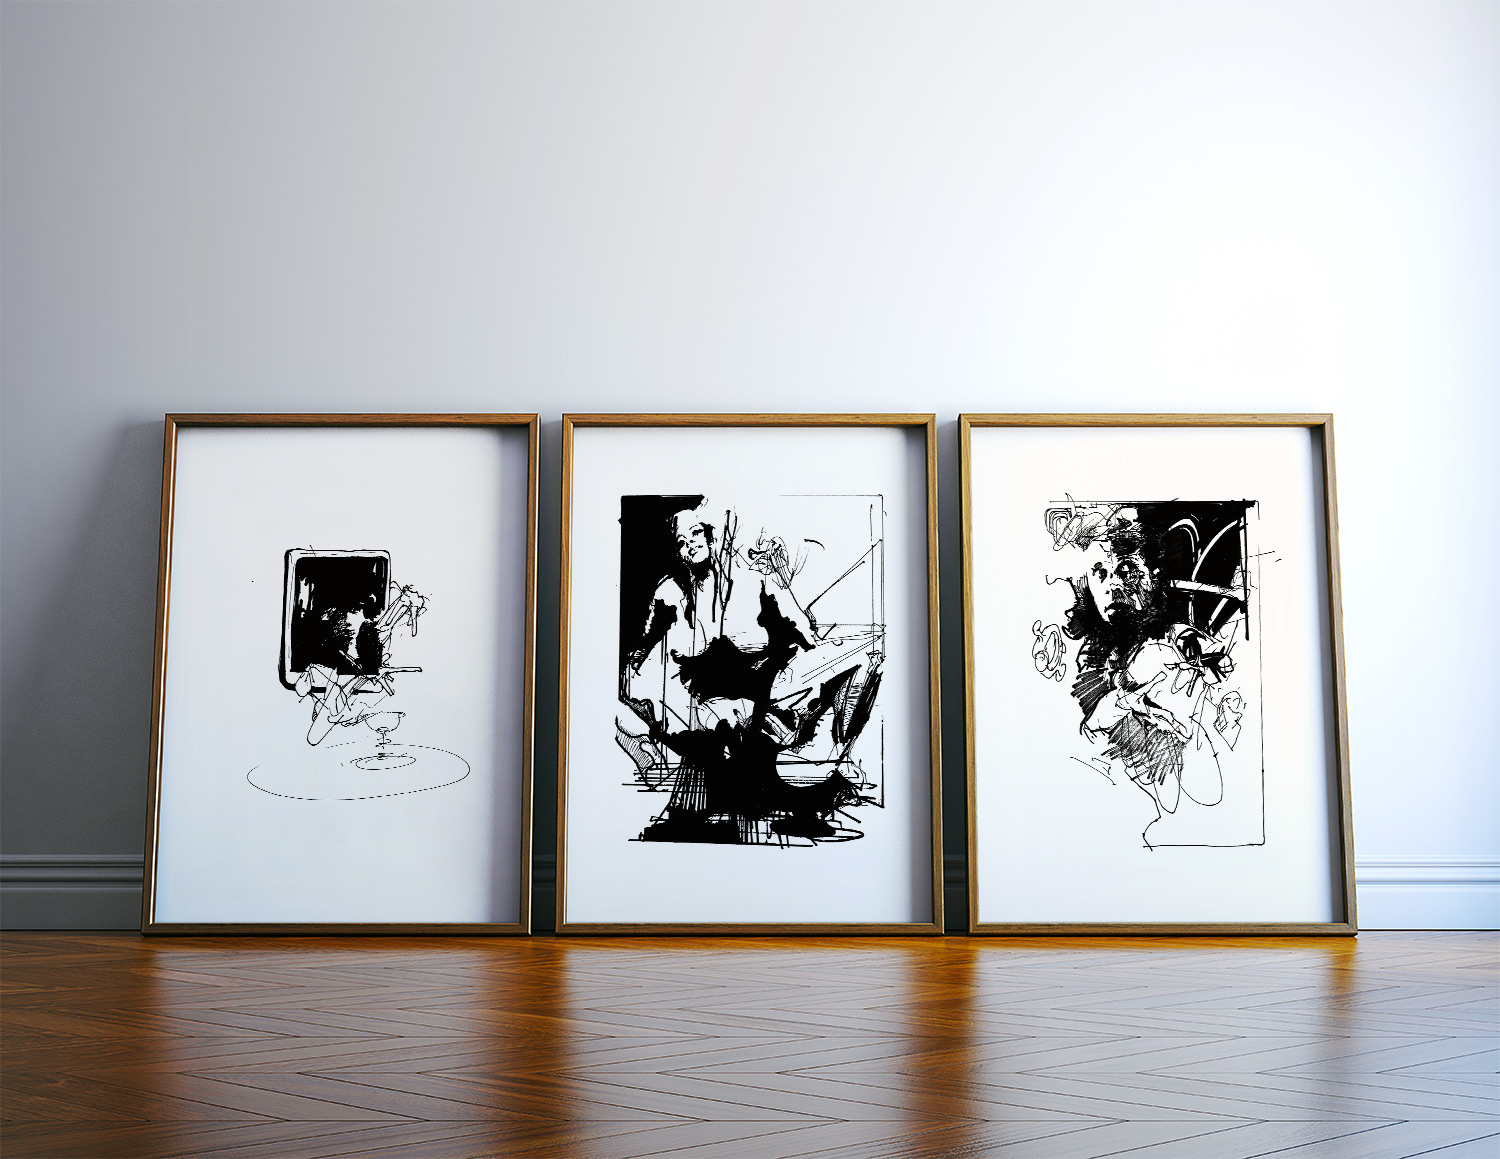 posters-prints, giclee-print, abstract, aesthetic, figurative, monochrome, portraiture, bodies, patterns, sexuality, black, white, ink, paper, black-and-white, contemporary-art, danish, decorative, design, erotic, interior, interior-design, modern, modern-art, nordic, nude, posters, prints, scandinavien, sexual, Buy original high quality art. Paintings, drawings, limited edition prints & posters by talented artists.